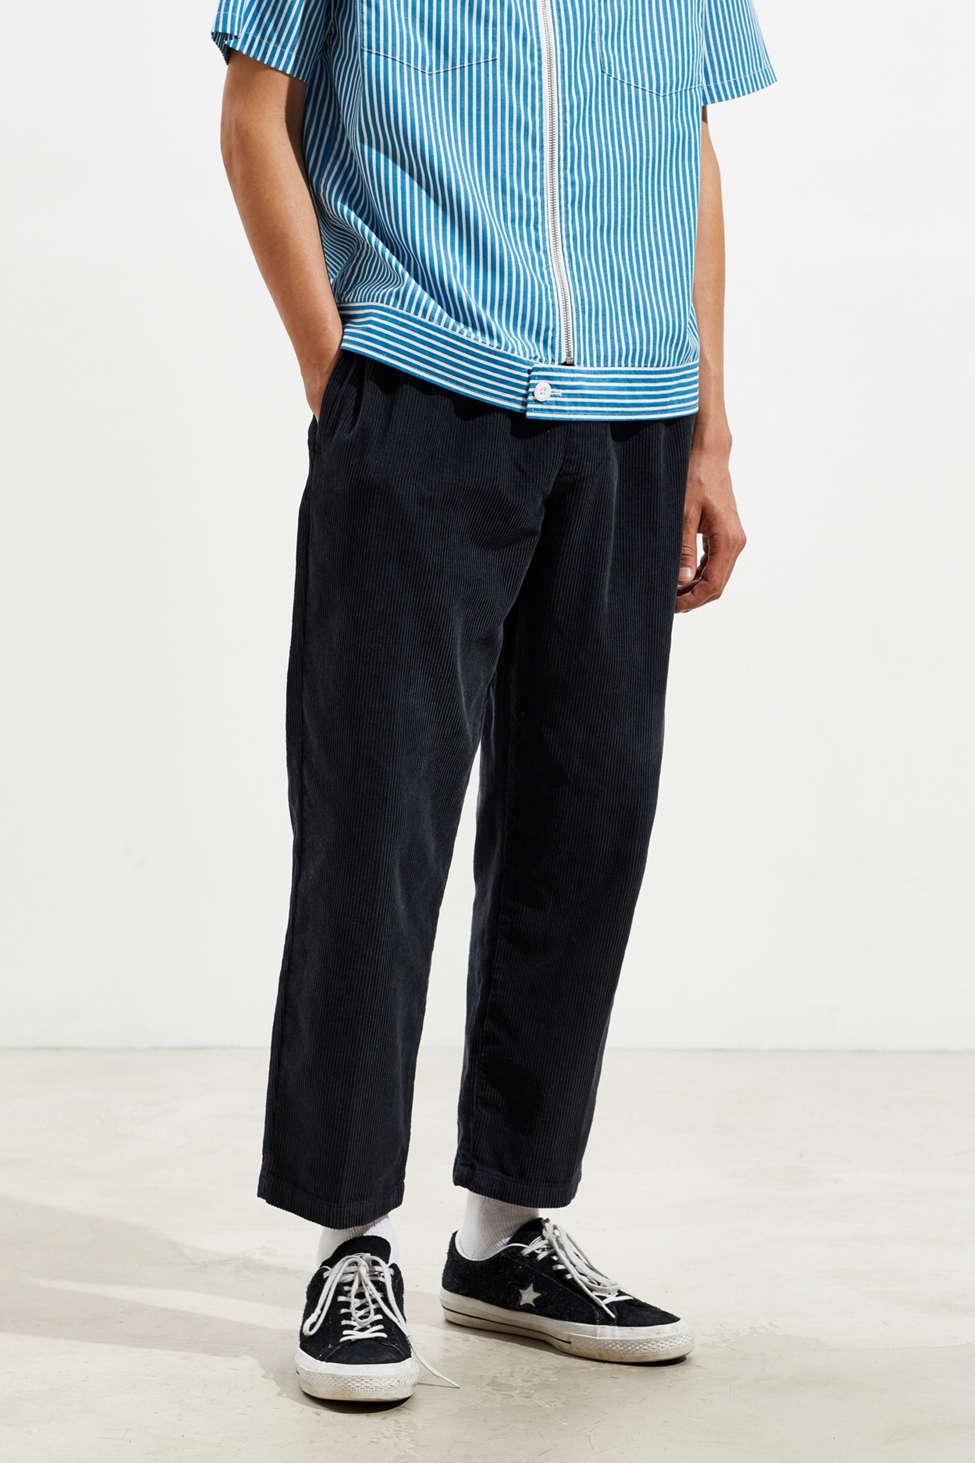 Urban Outfitters Uo Corduroy Beach Pant in Blue for Men - Lyst